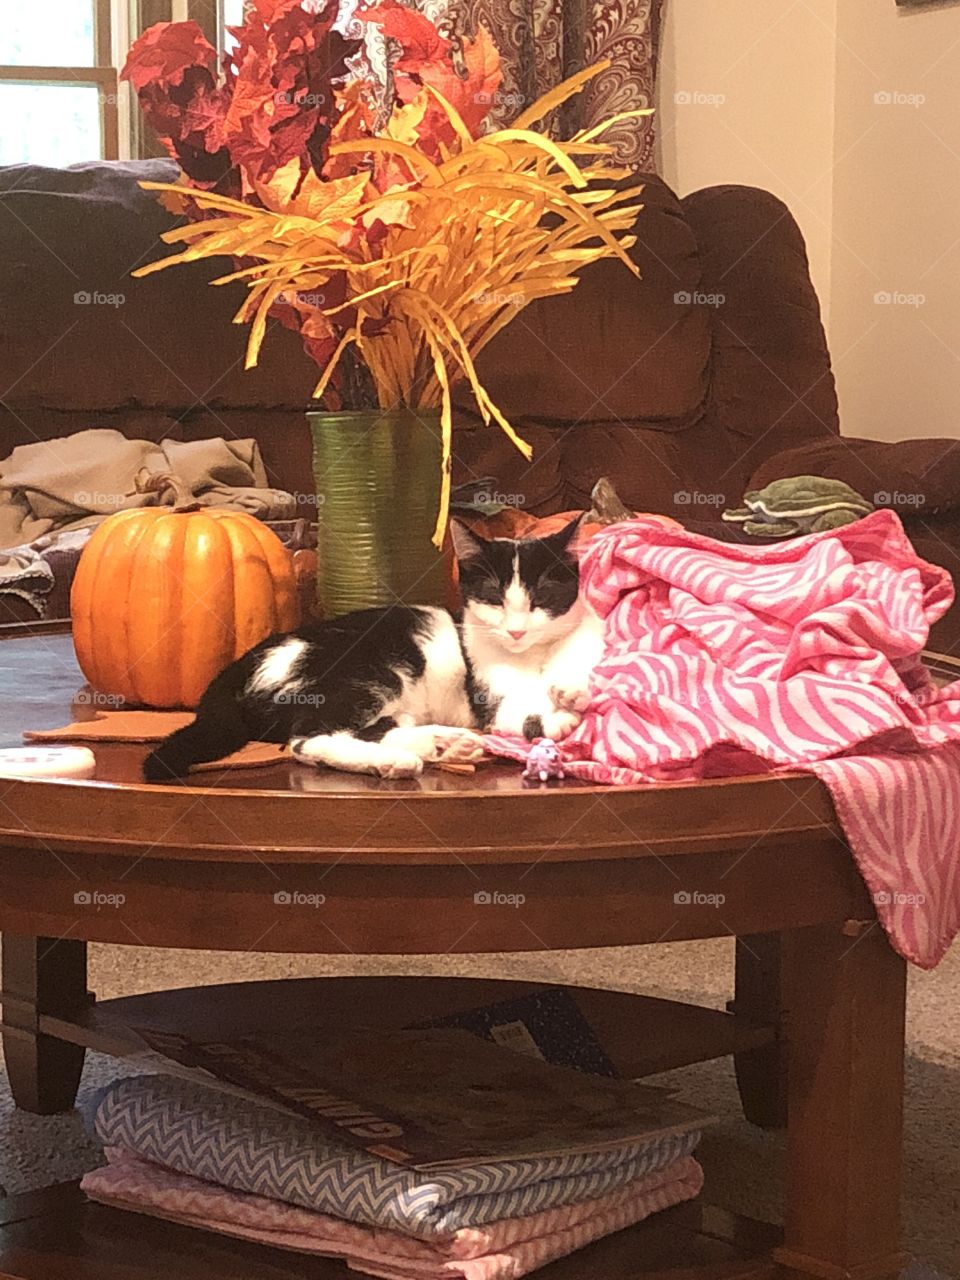 Black and white kitten laying on coffee table.